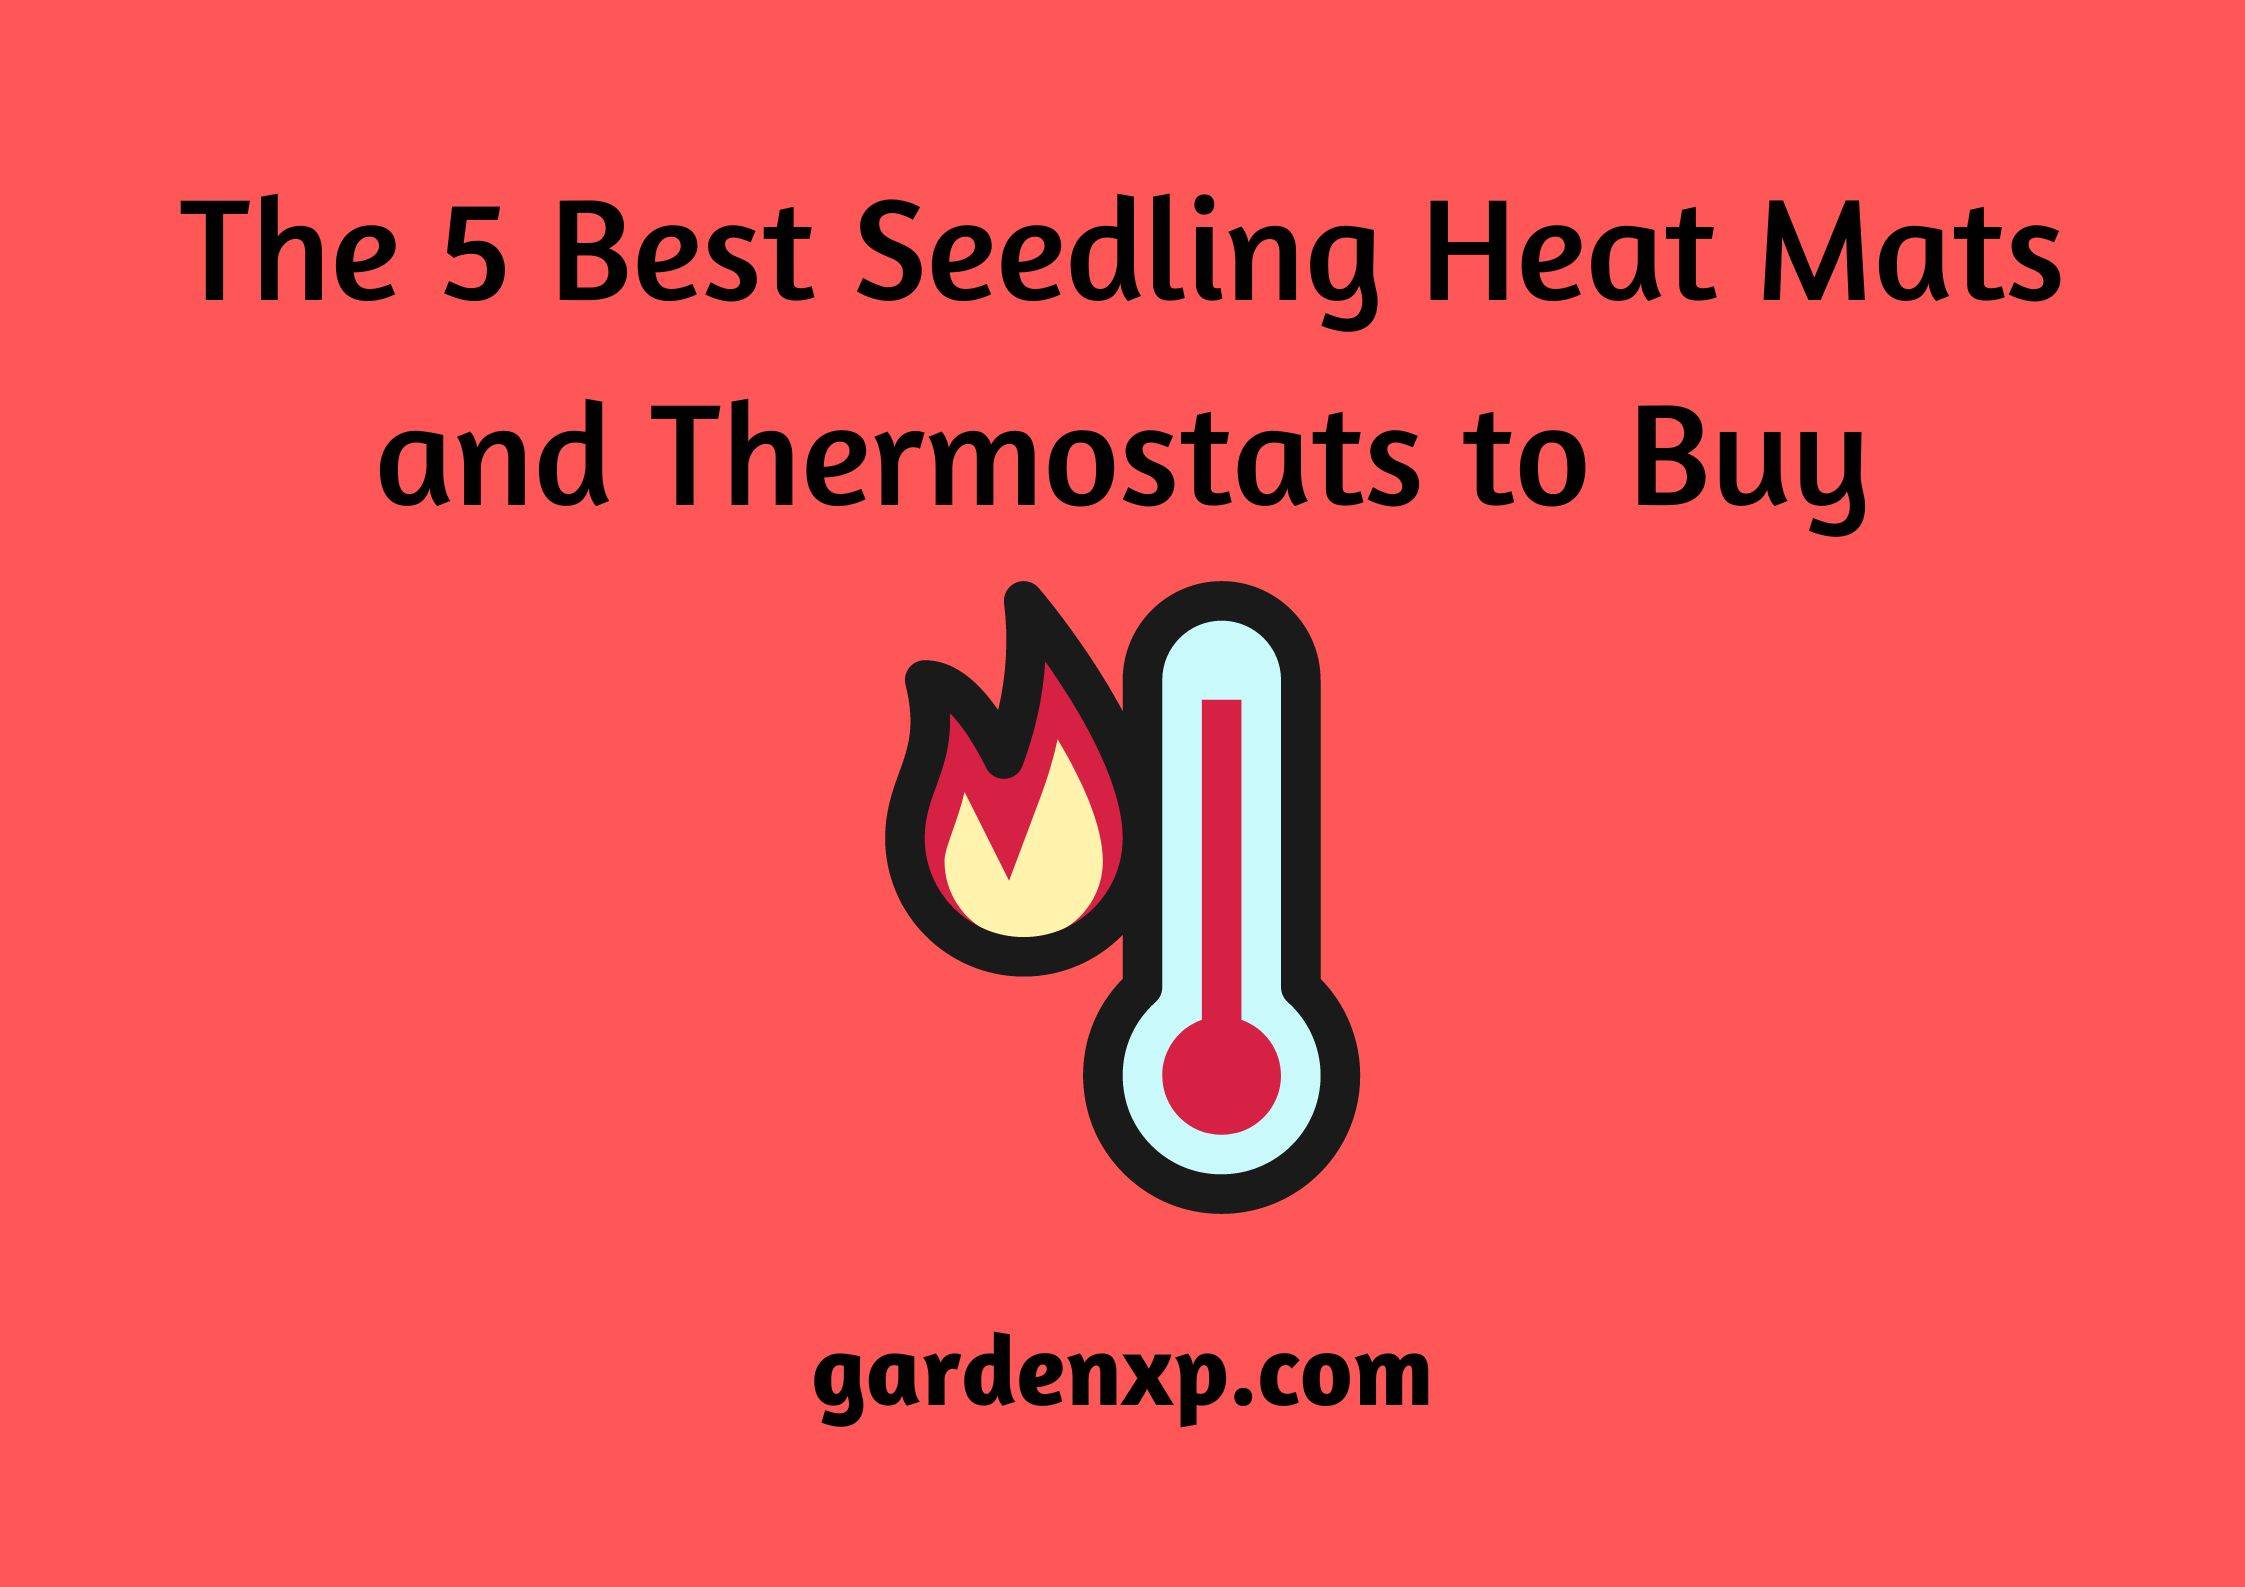 The 5 Best Seedling Heat Mats and Thermostats to Buy